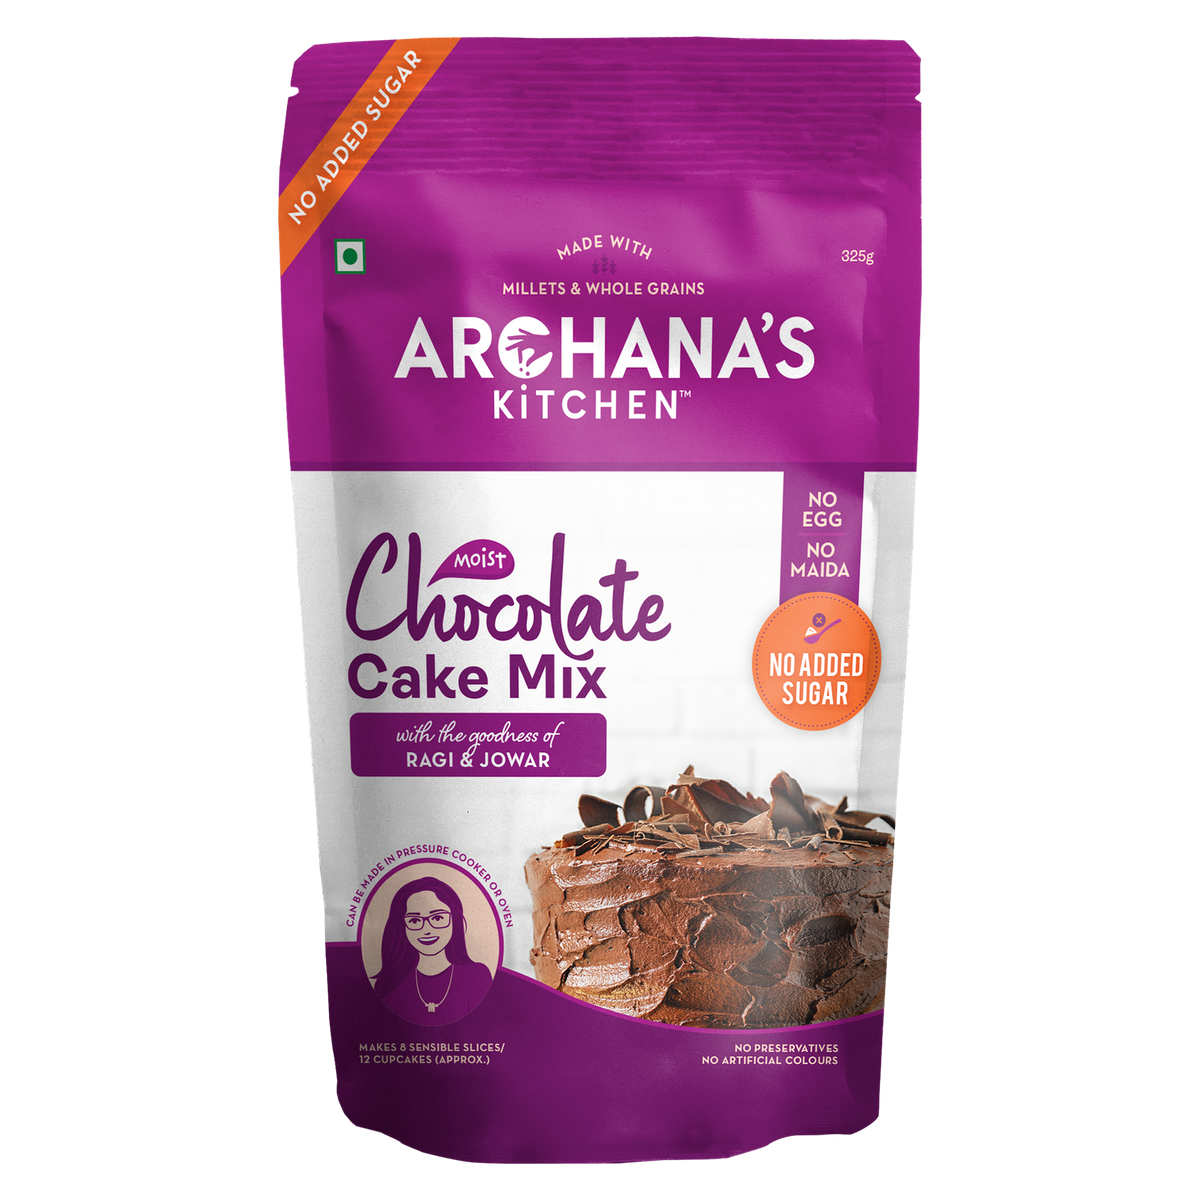 Stevia mixture for making chocolate cake 40g - order the best from Auchan